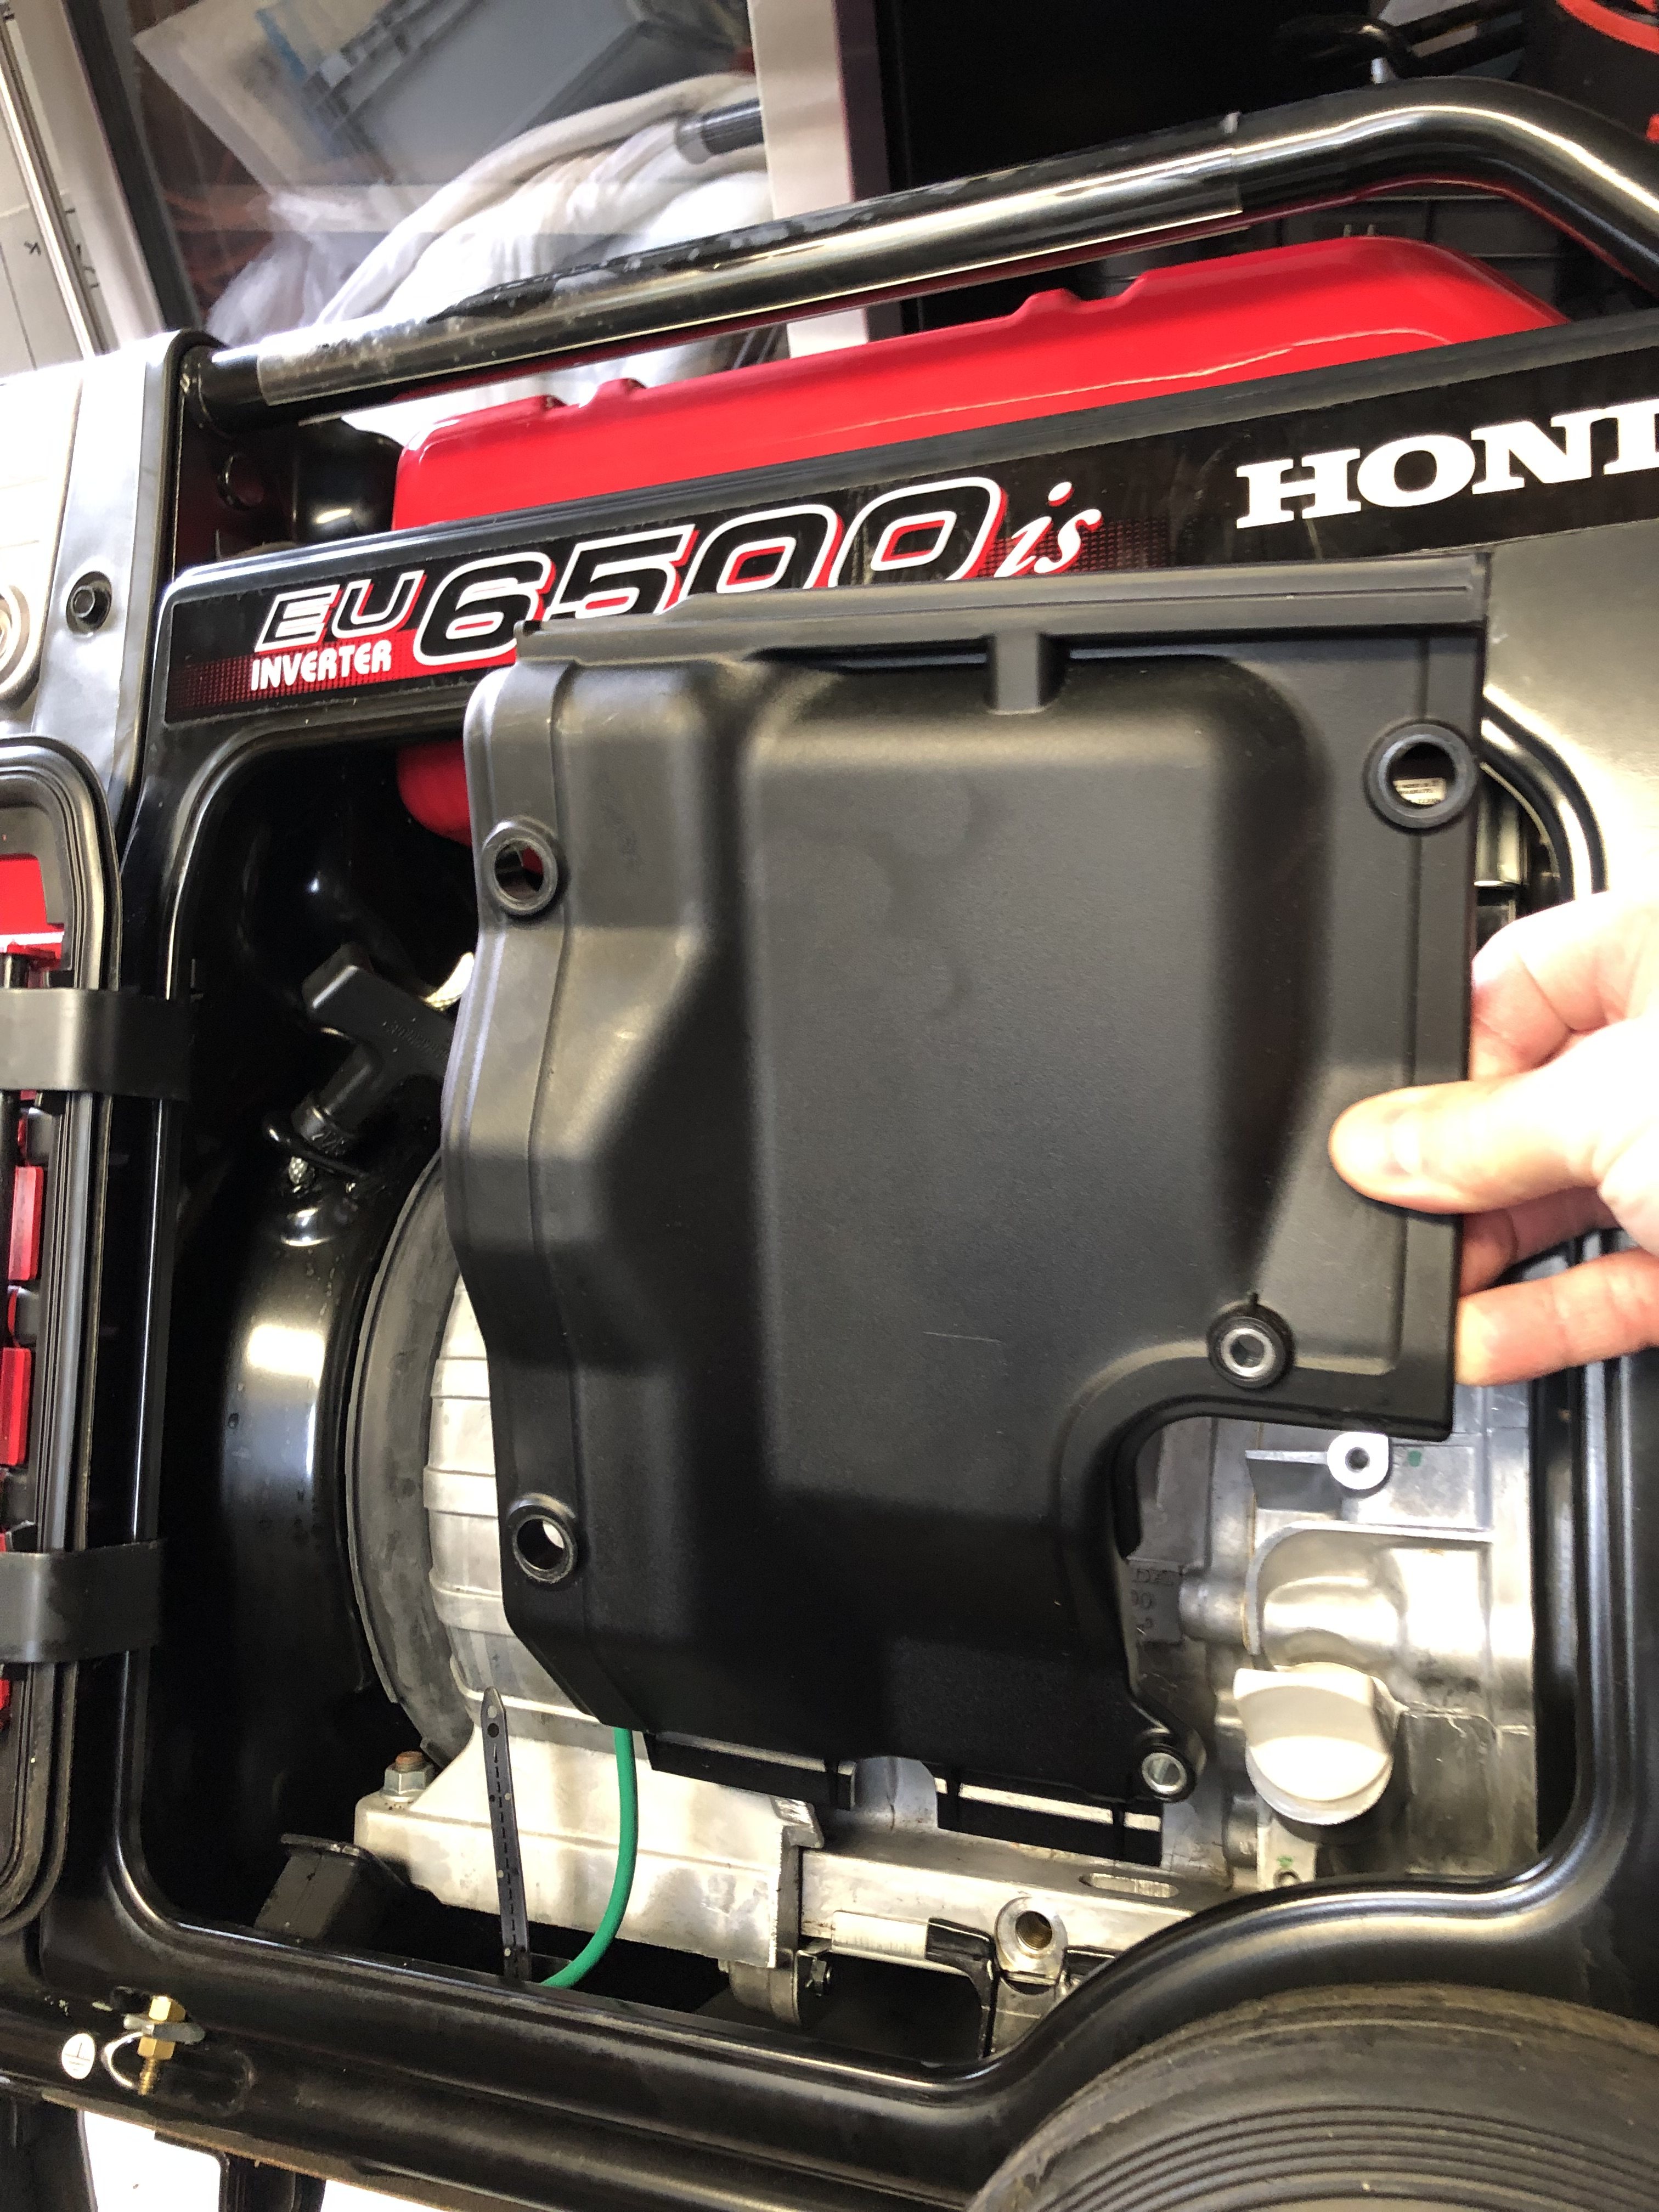 Honda EU6500iS, oil drain/fill side panel removed, showing sound baffle on GX390.